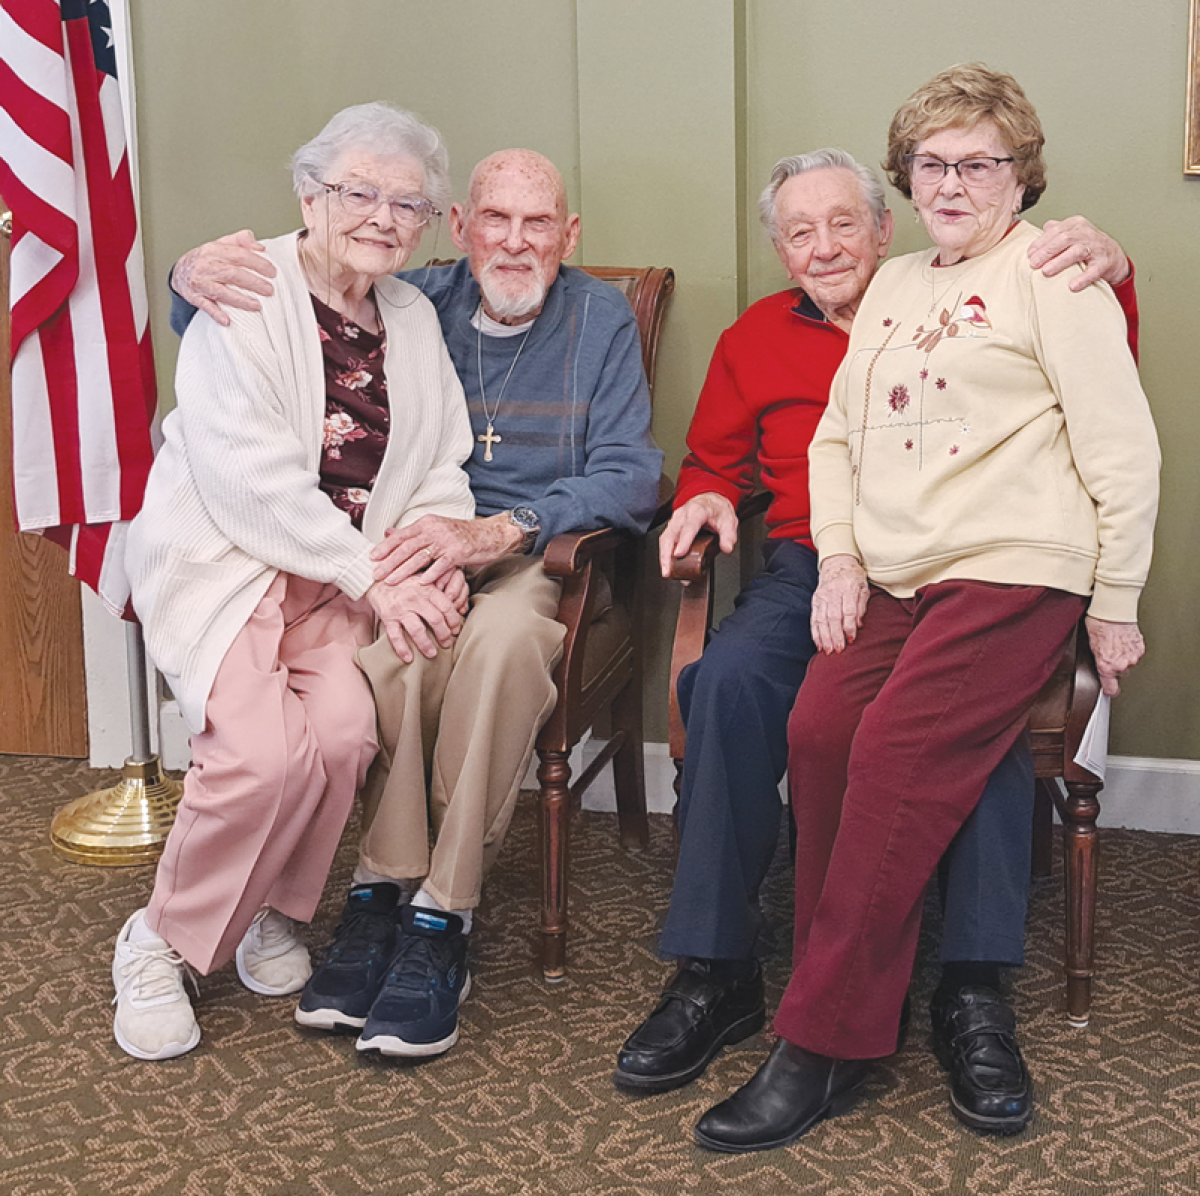  Sisters Joanne Arnold, 95, left, and Janice Randall, 89, sit with their U.S. military veteran husbands Roland Arnold, 97,  and Dick Randall, 95, following a Veterans Day ceremony at Brookdale Senior Living of Novi last November.  